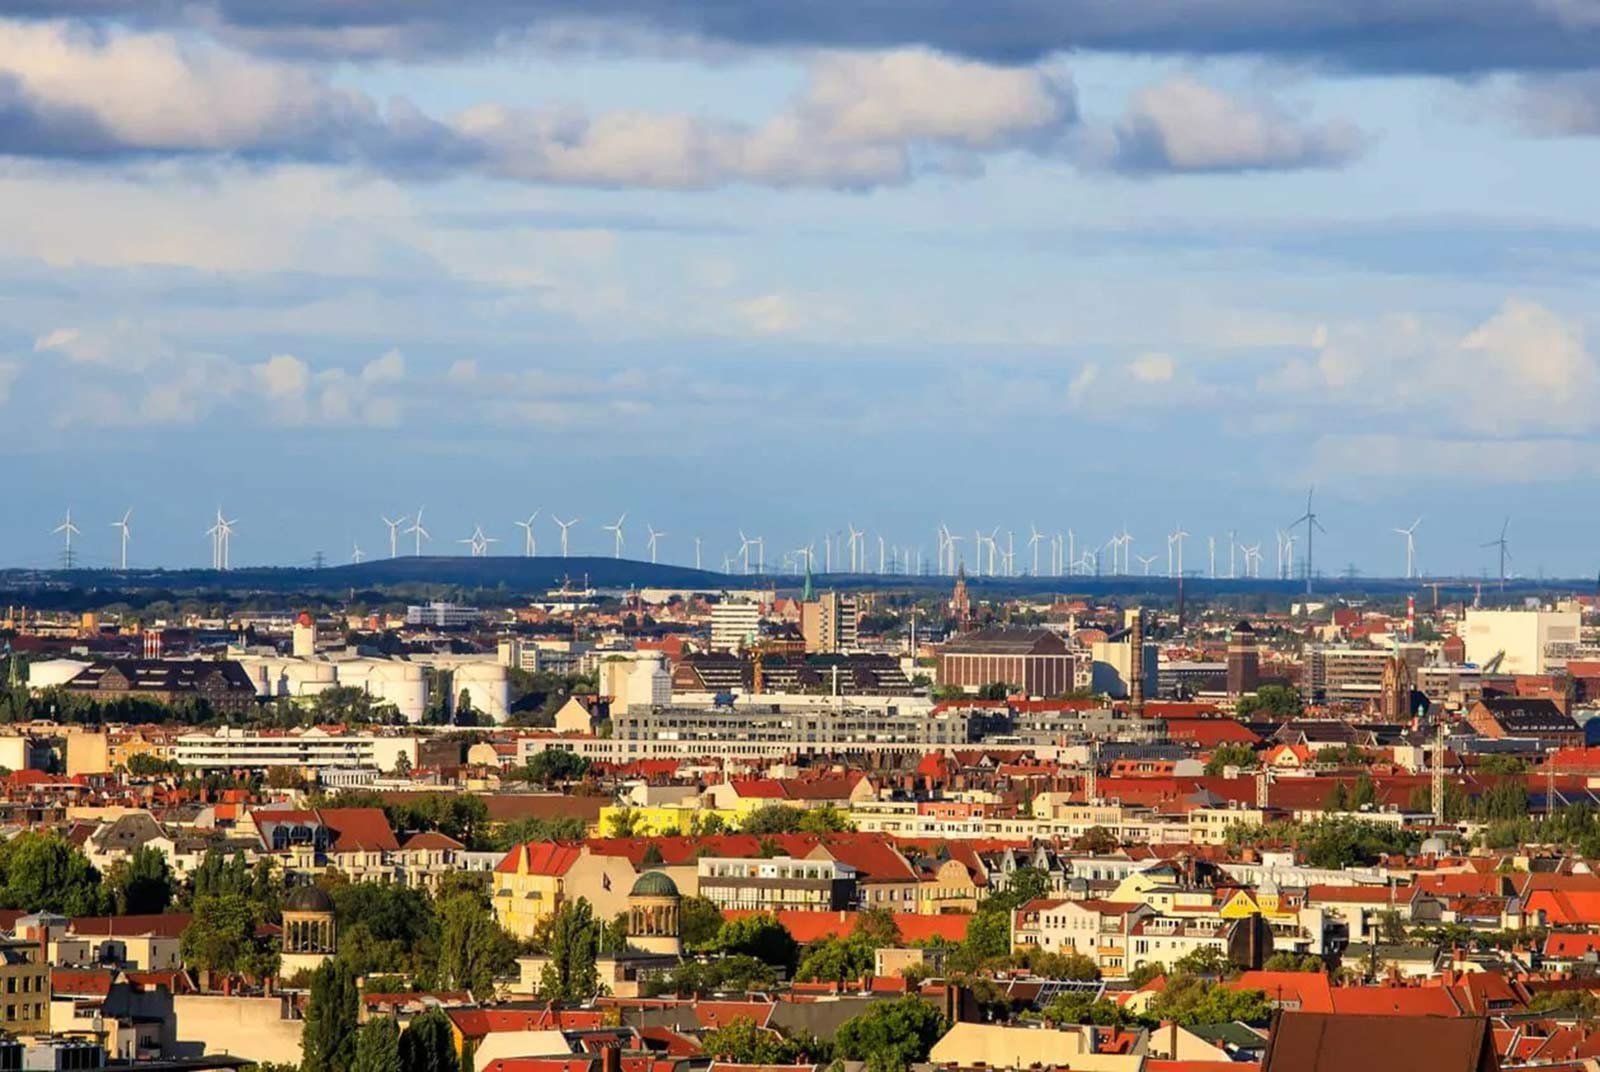 Facing an energy crisis, is Europe really embracing nuclear?